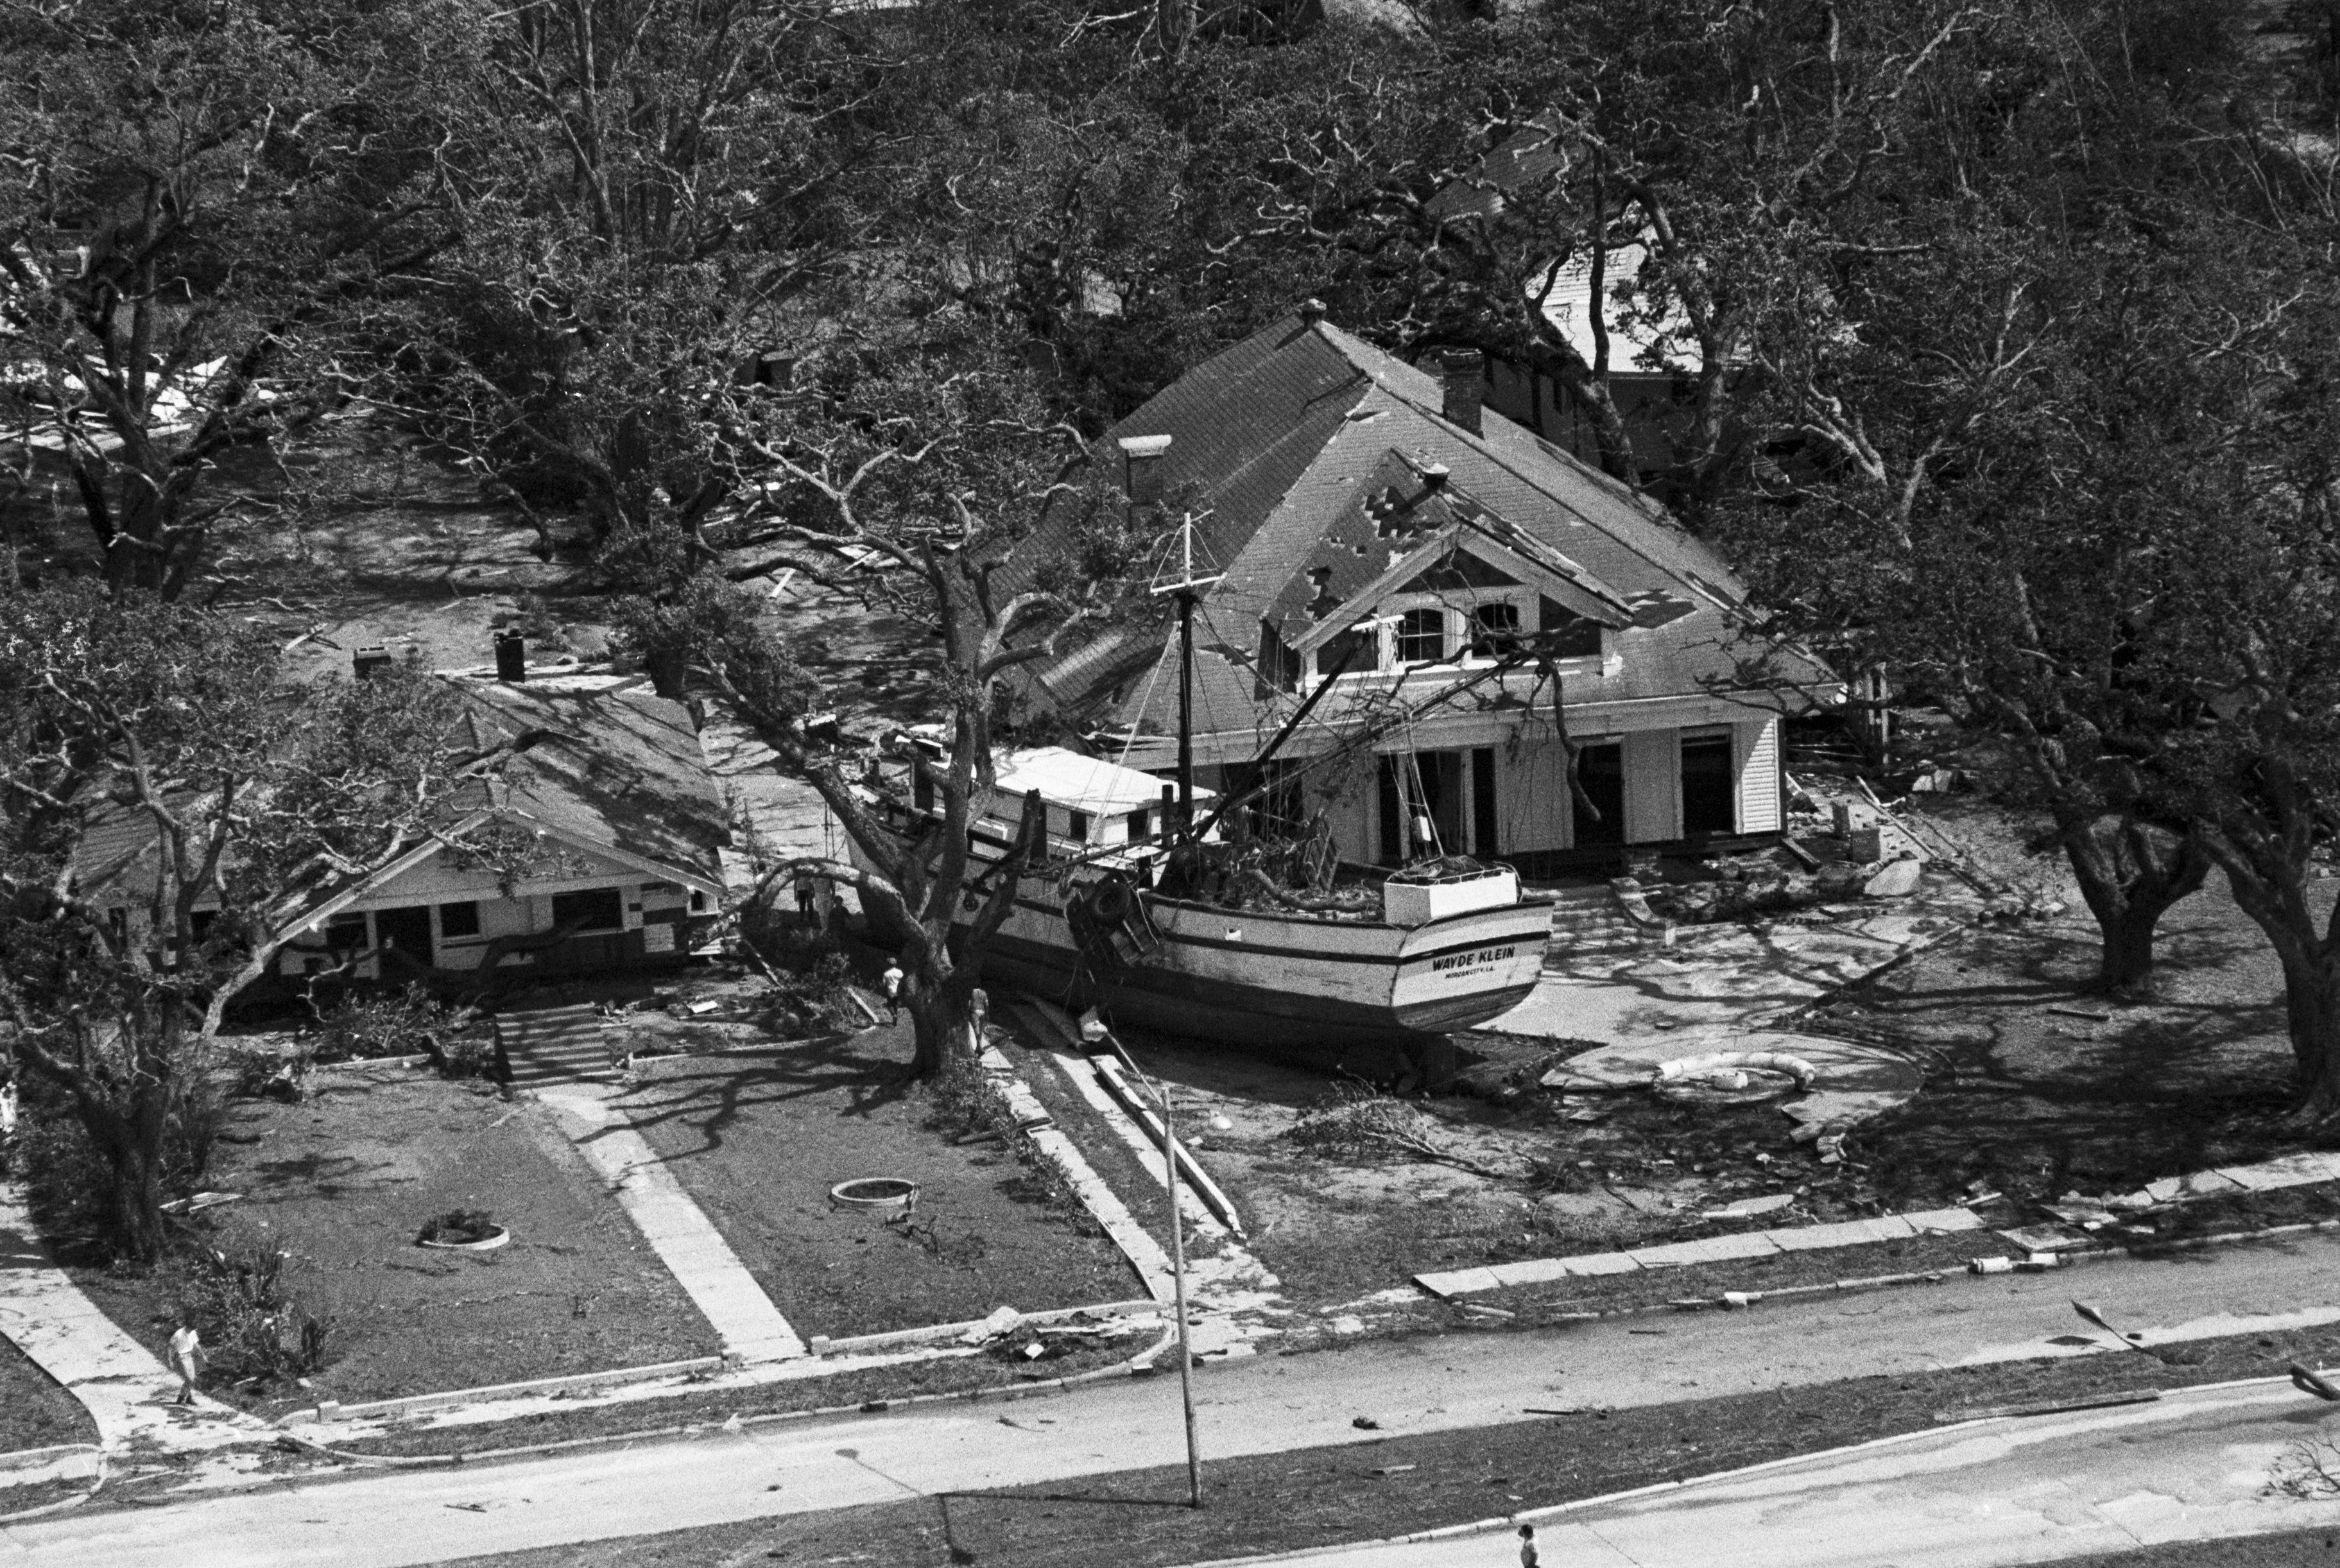 The shrimper "Wade Klein" is thrown against a house facing the beach in Biloxi, Mississippi, Aug. 18, 1969, shortly after Hurricane Camille tore through the Mississippi Gulf Coast.